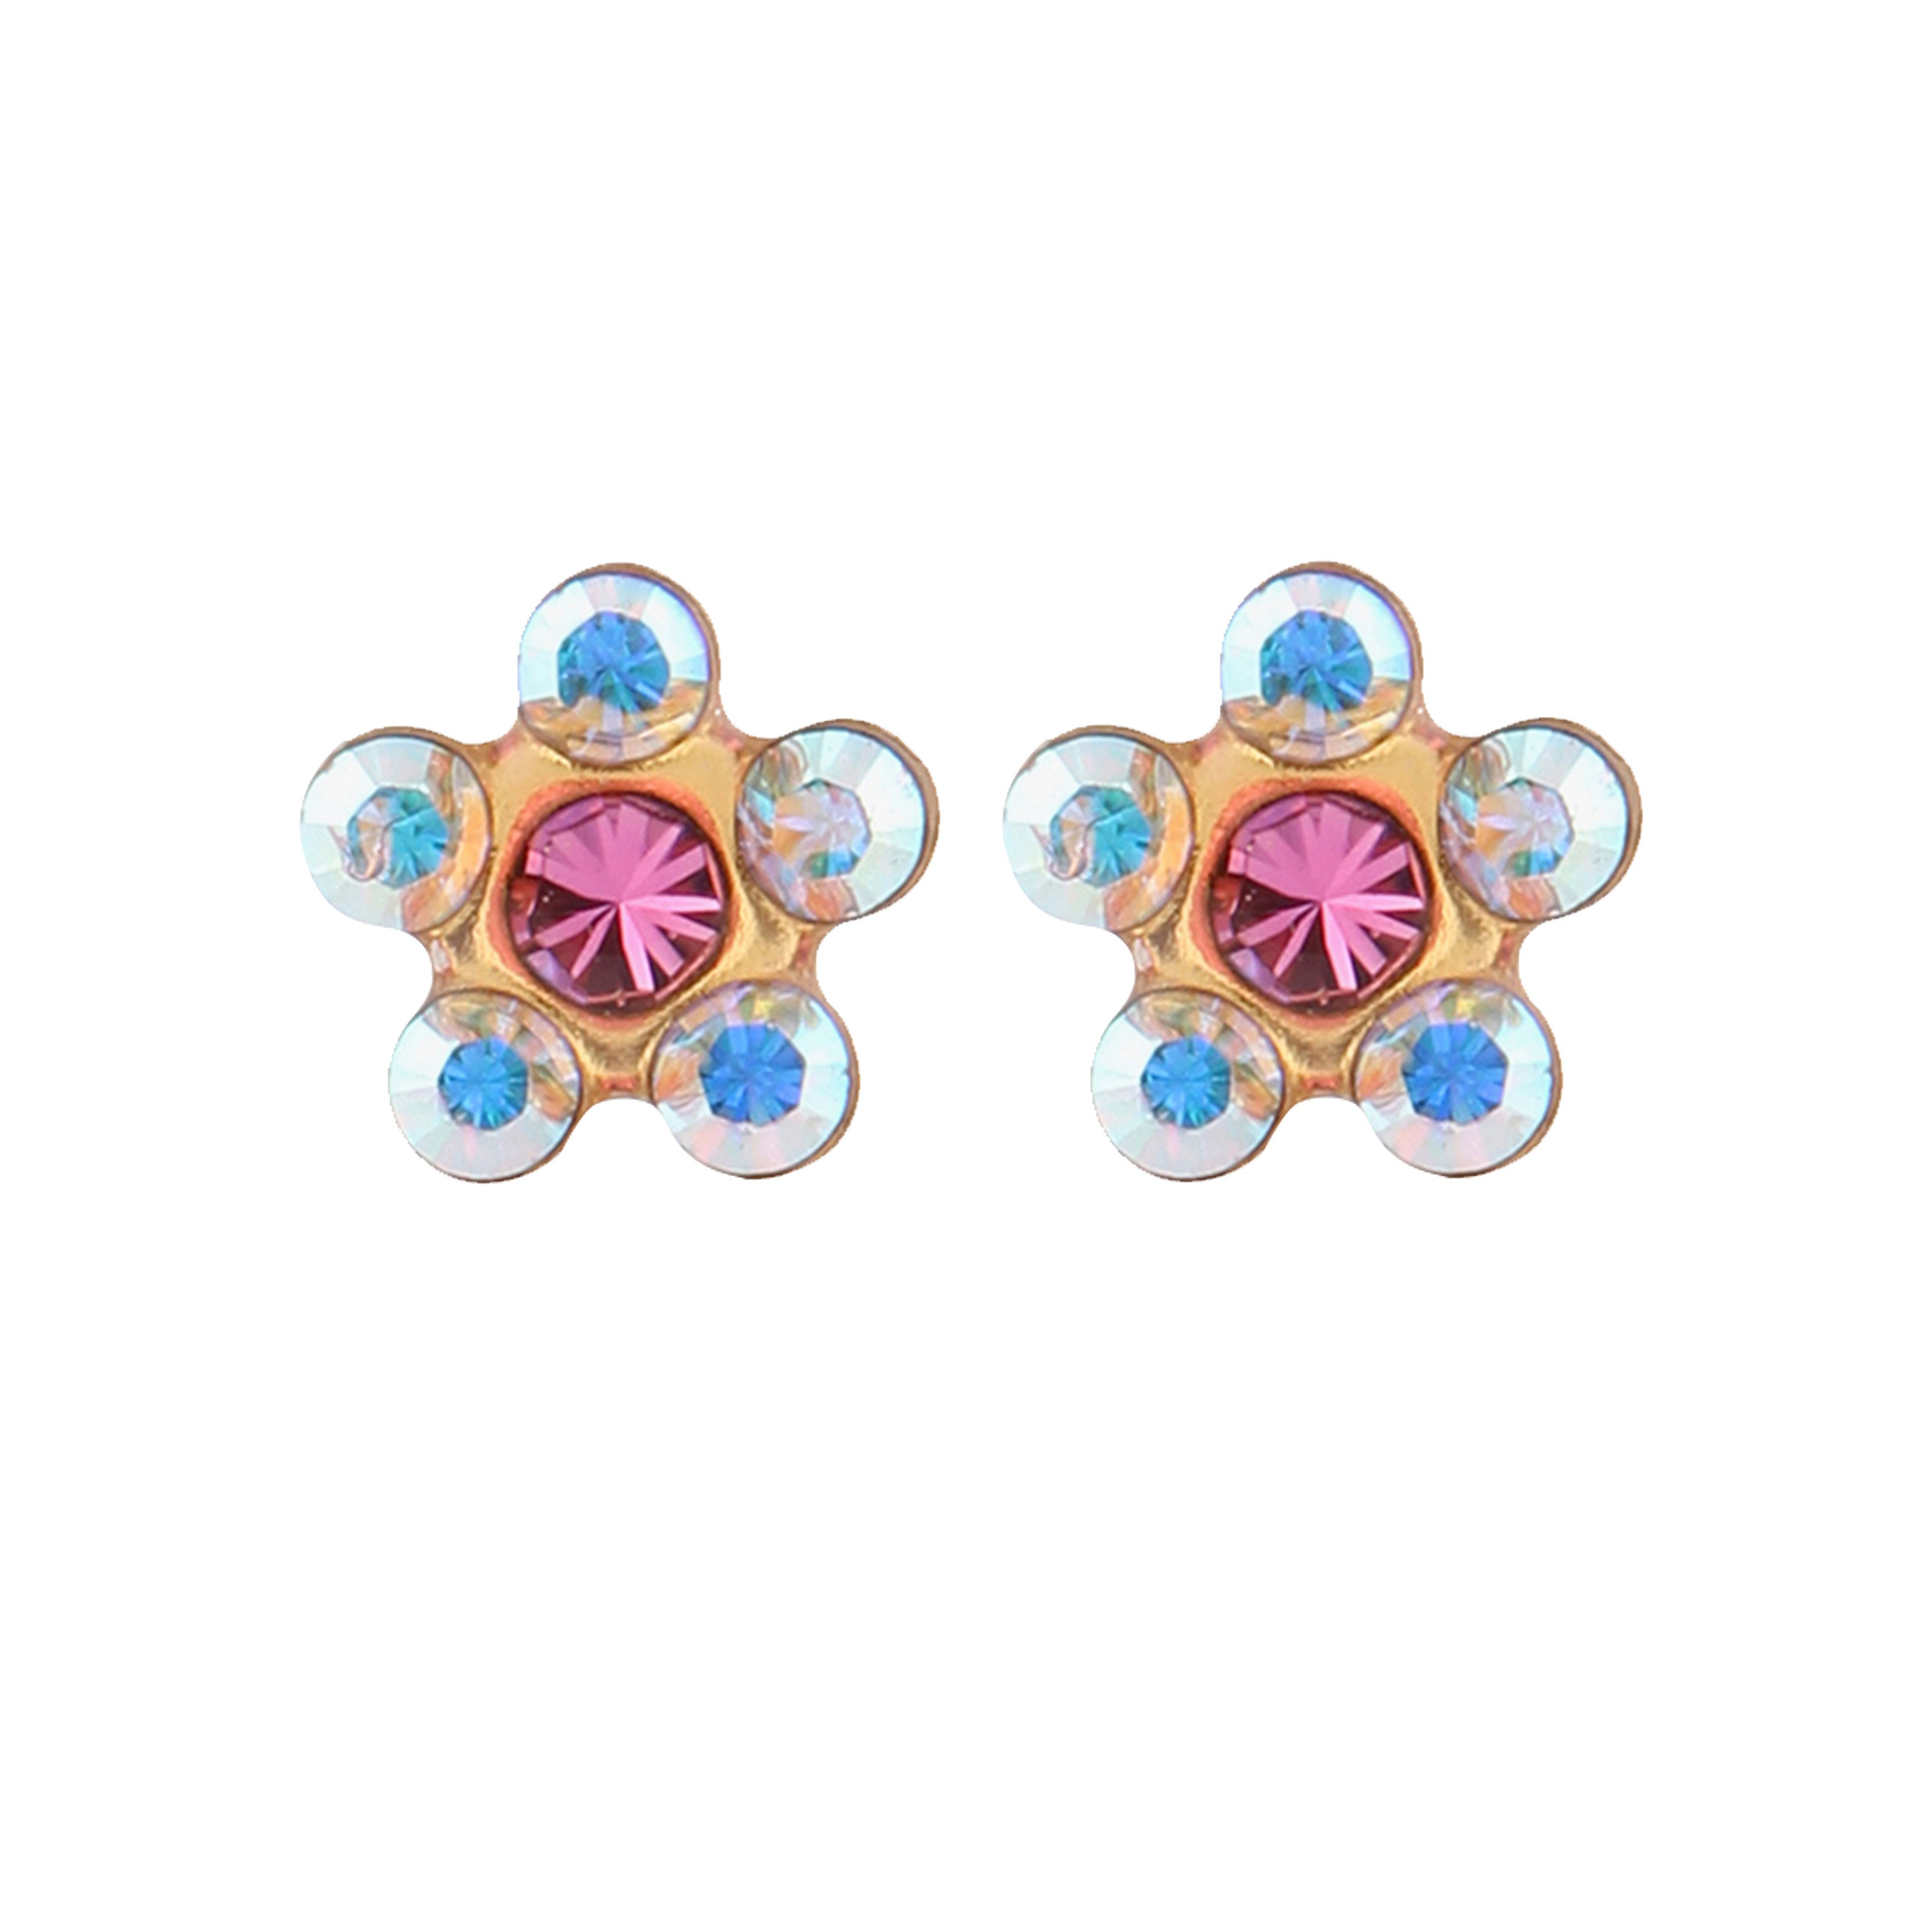 Daisy (Flower) - AB Crystal - Oct Rose – Light Blue & Pink | 24K Pure Gold-Plated Piercing Earrings with Ear Piercing Cartridge | Studex System75